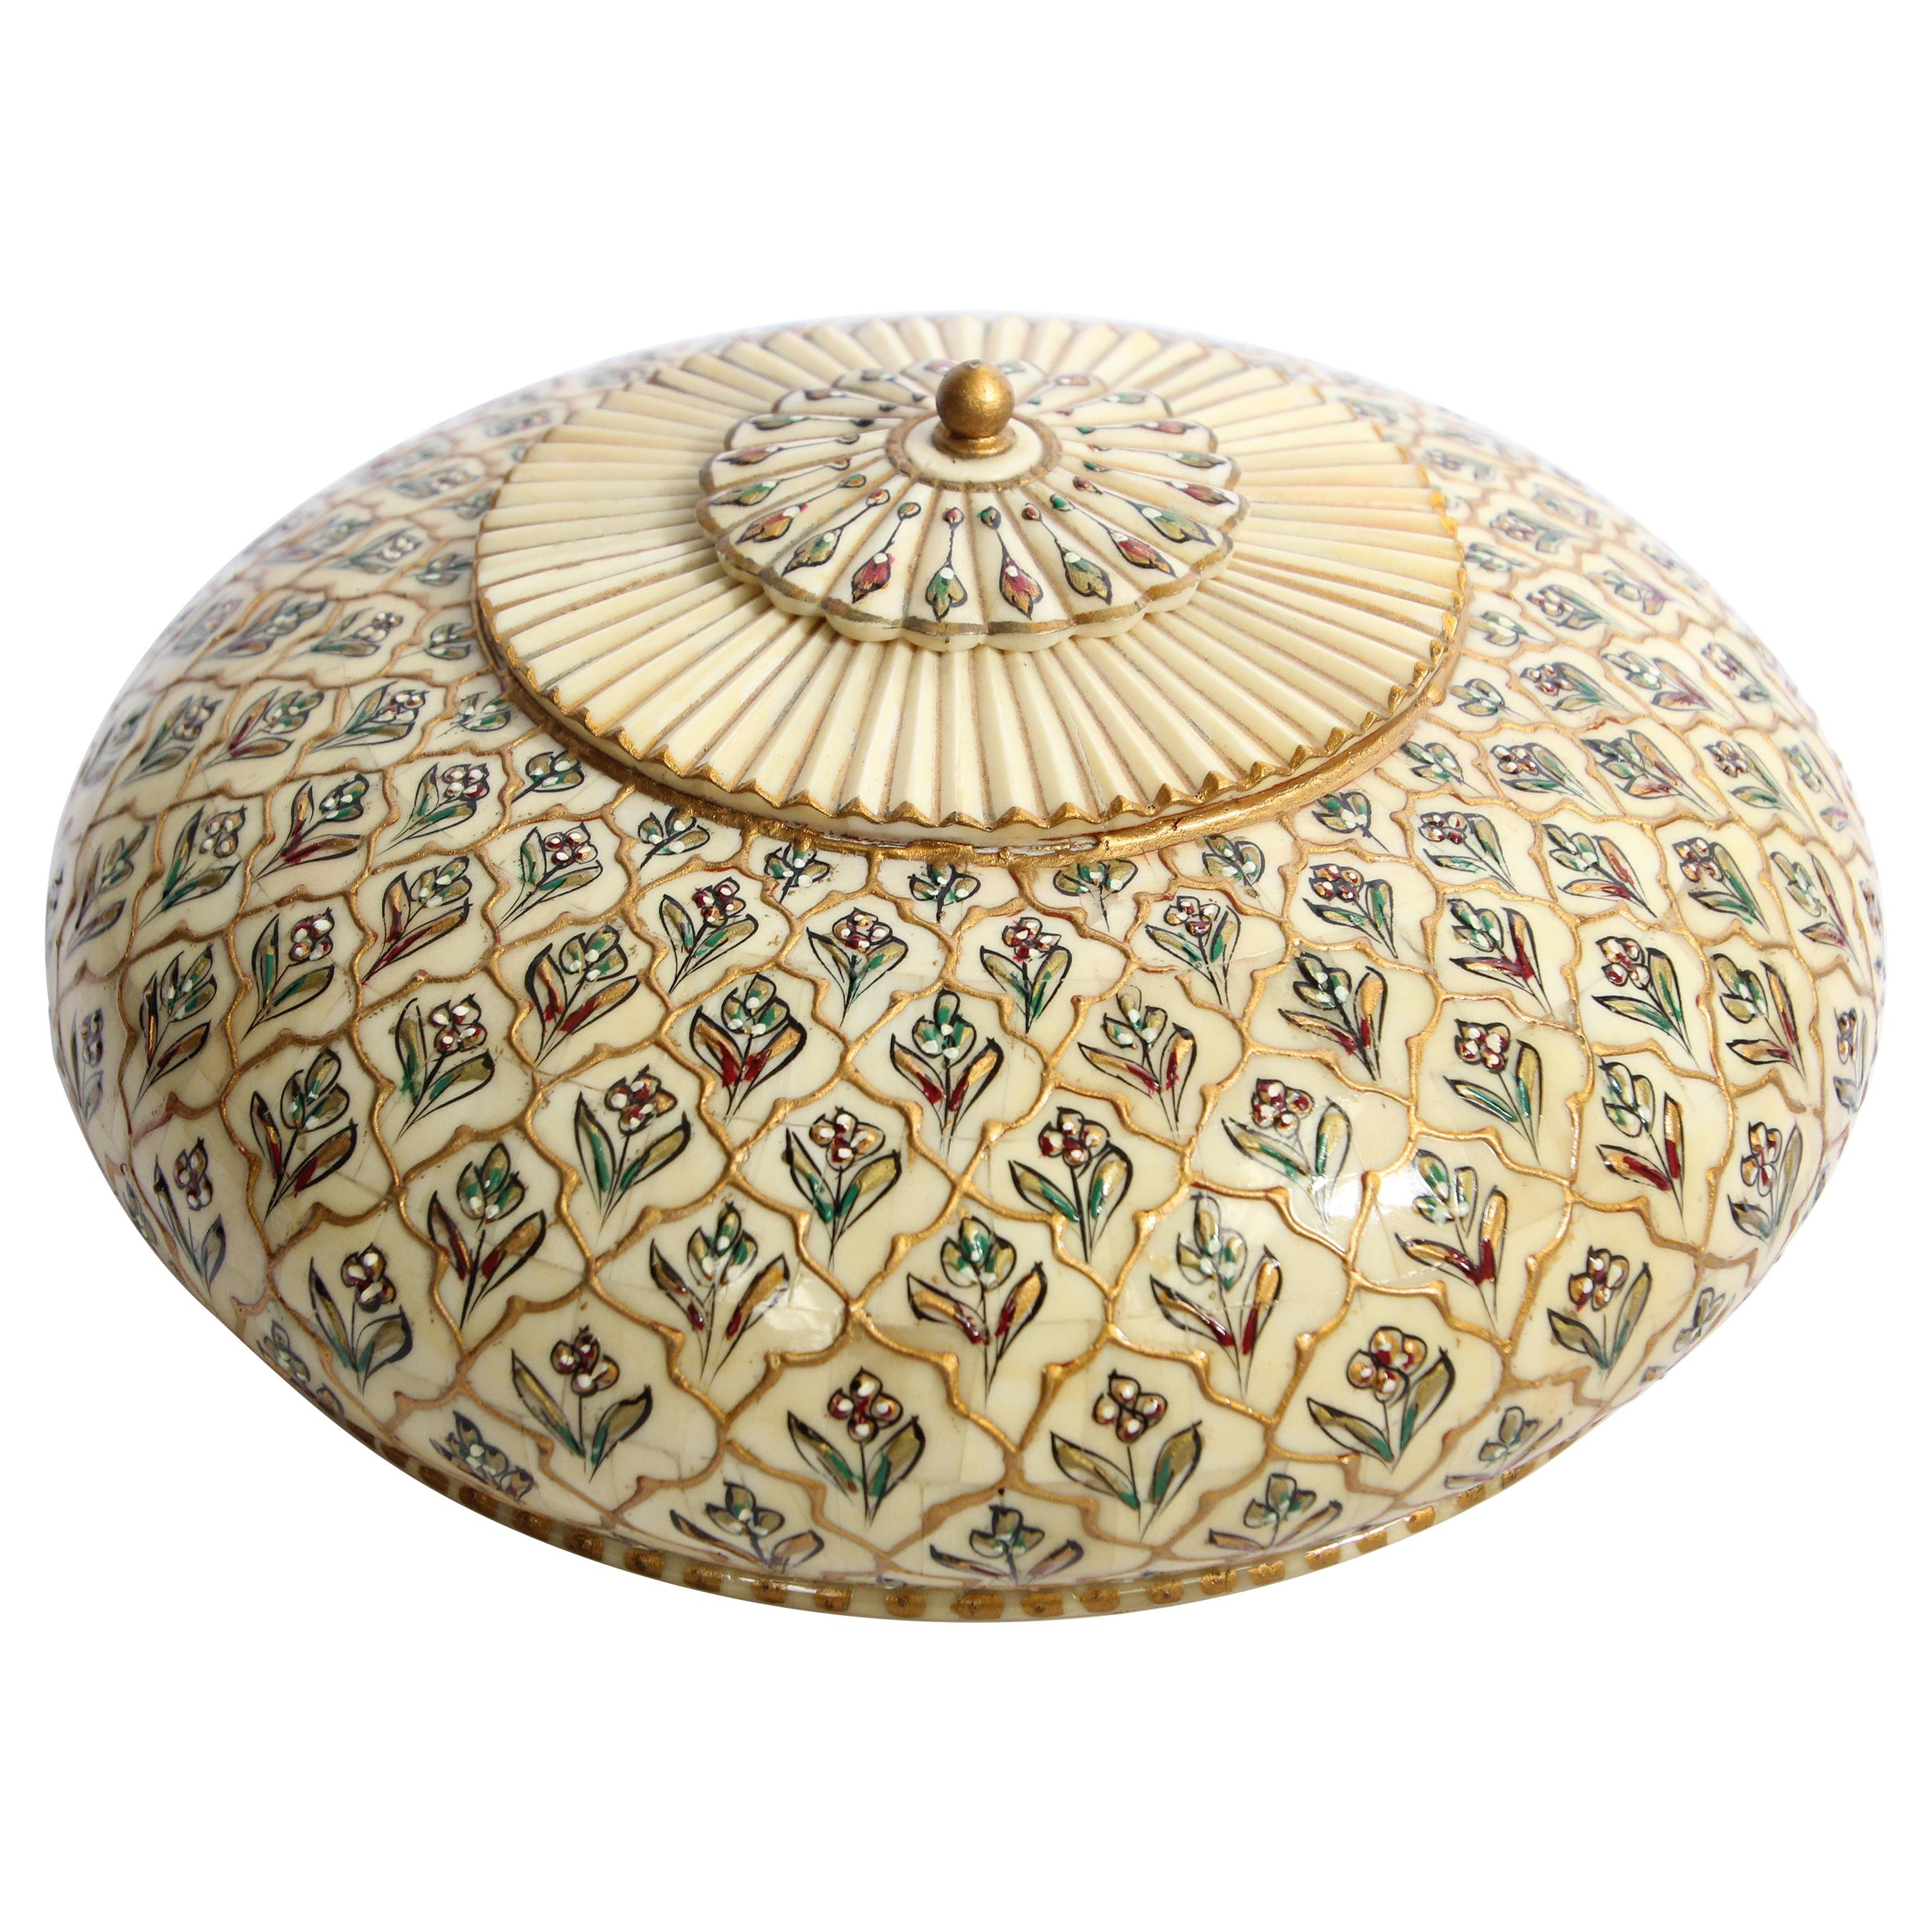 Collectible Opium Container Mughal Art Round Lidded Box